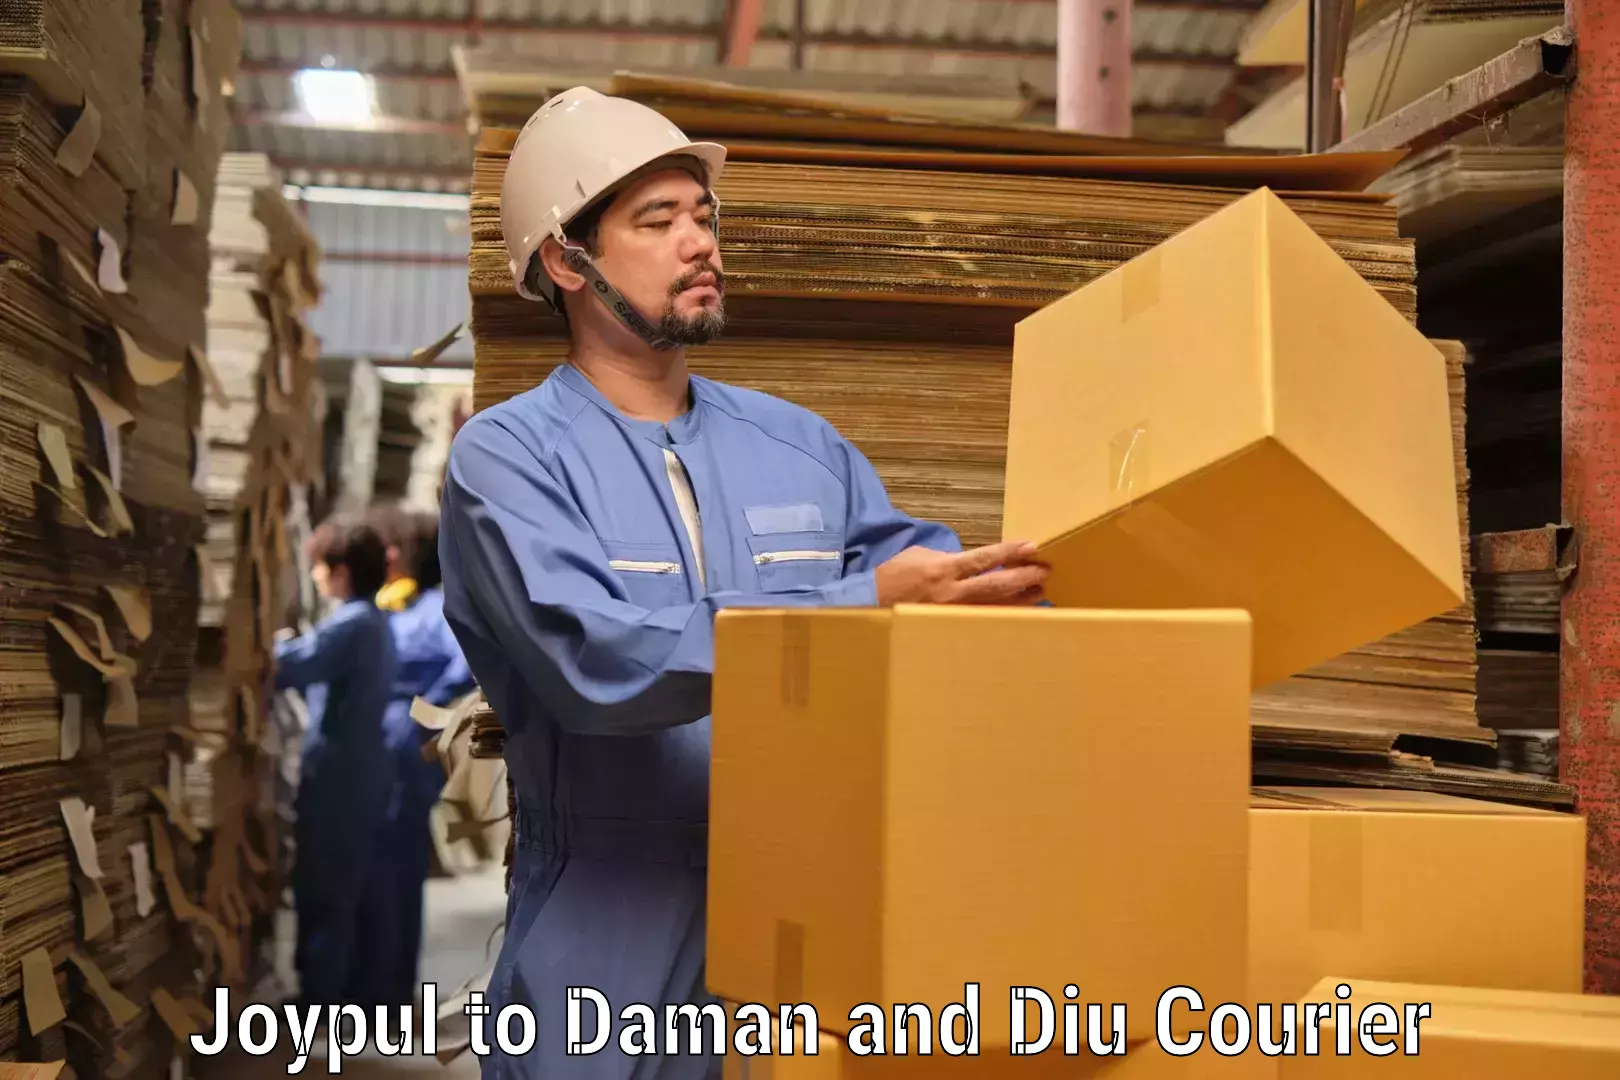 Parcel delivery automation Joypul to Daman and Diu